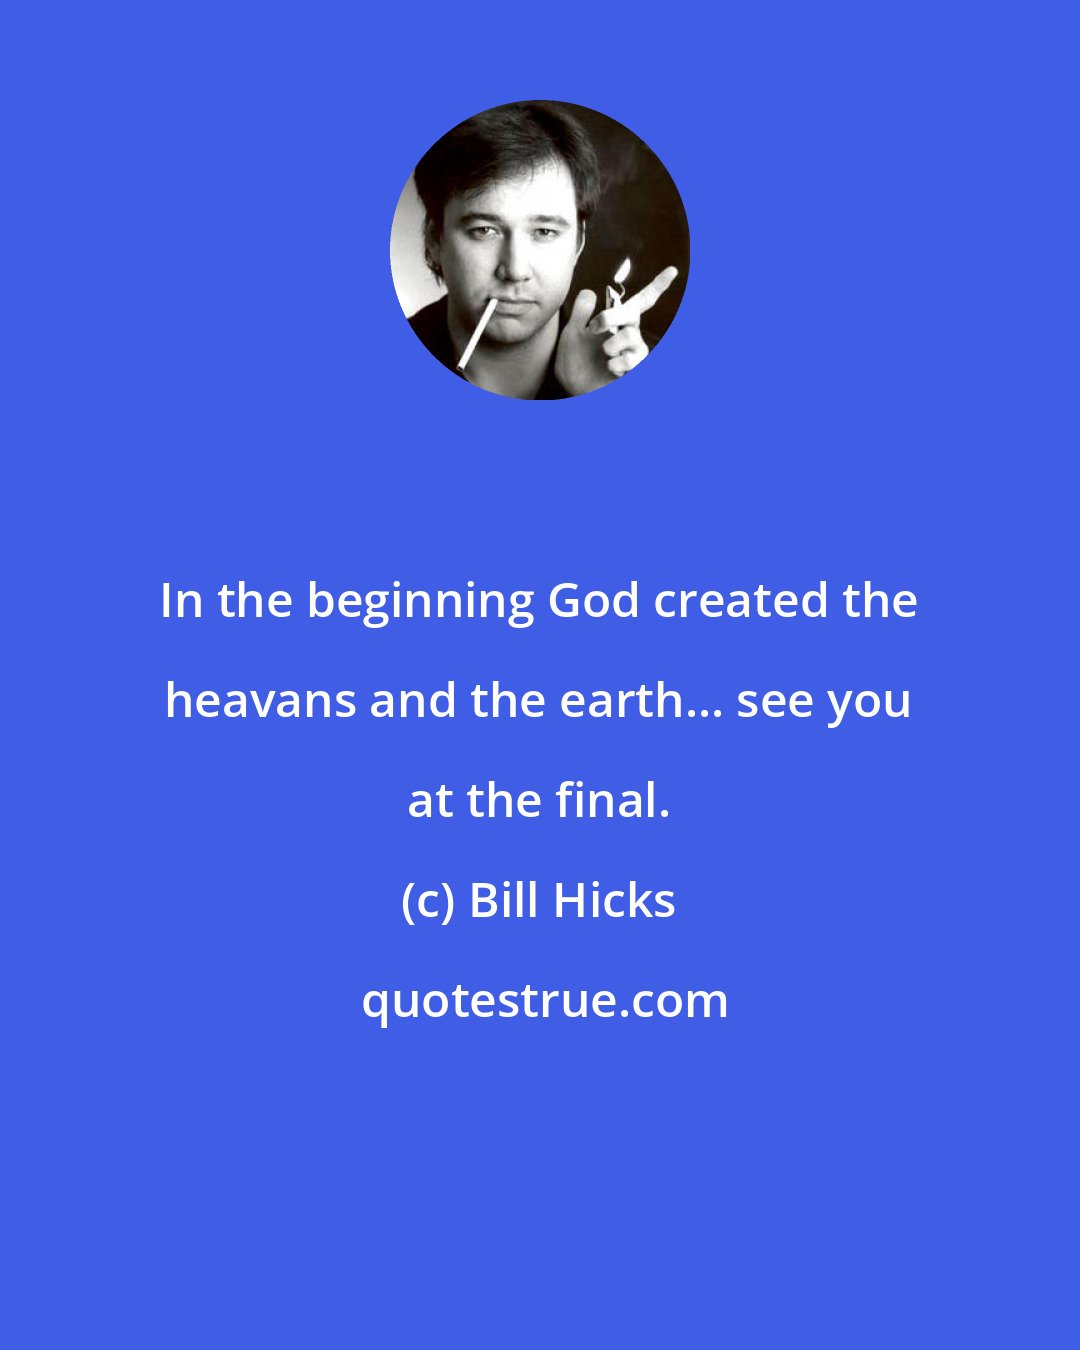 Bill Hicks: In the beginning God created the heavans and the earth... see you at the final.